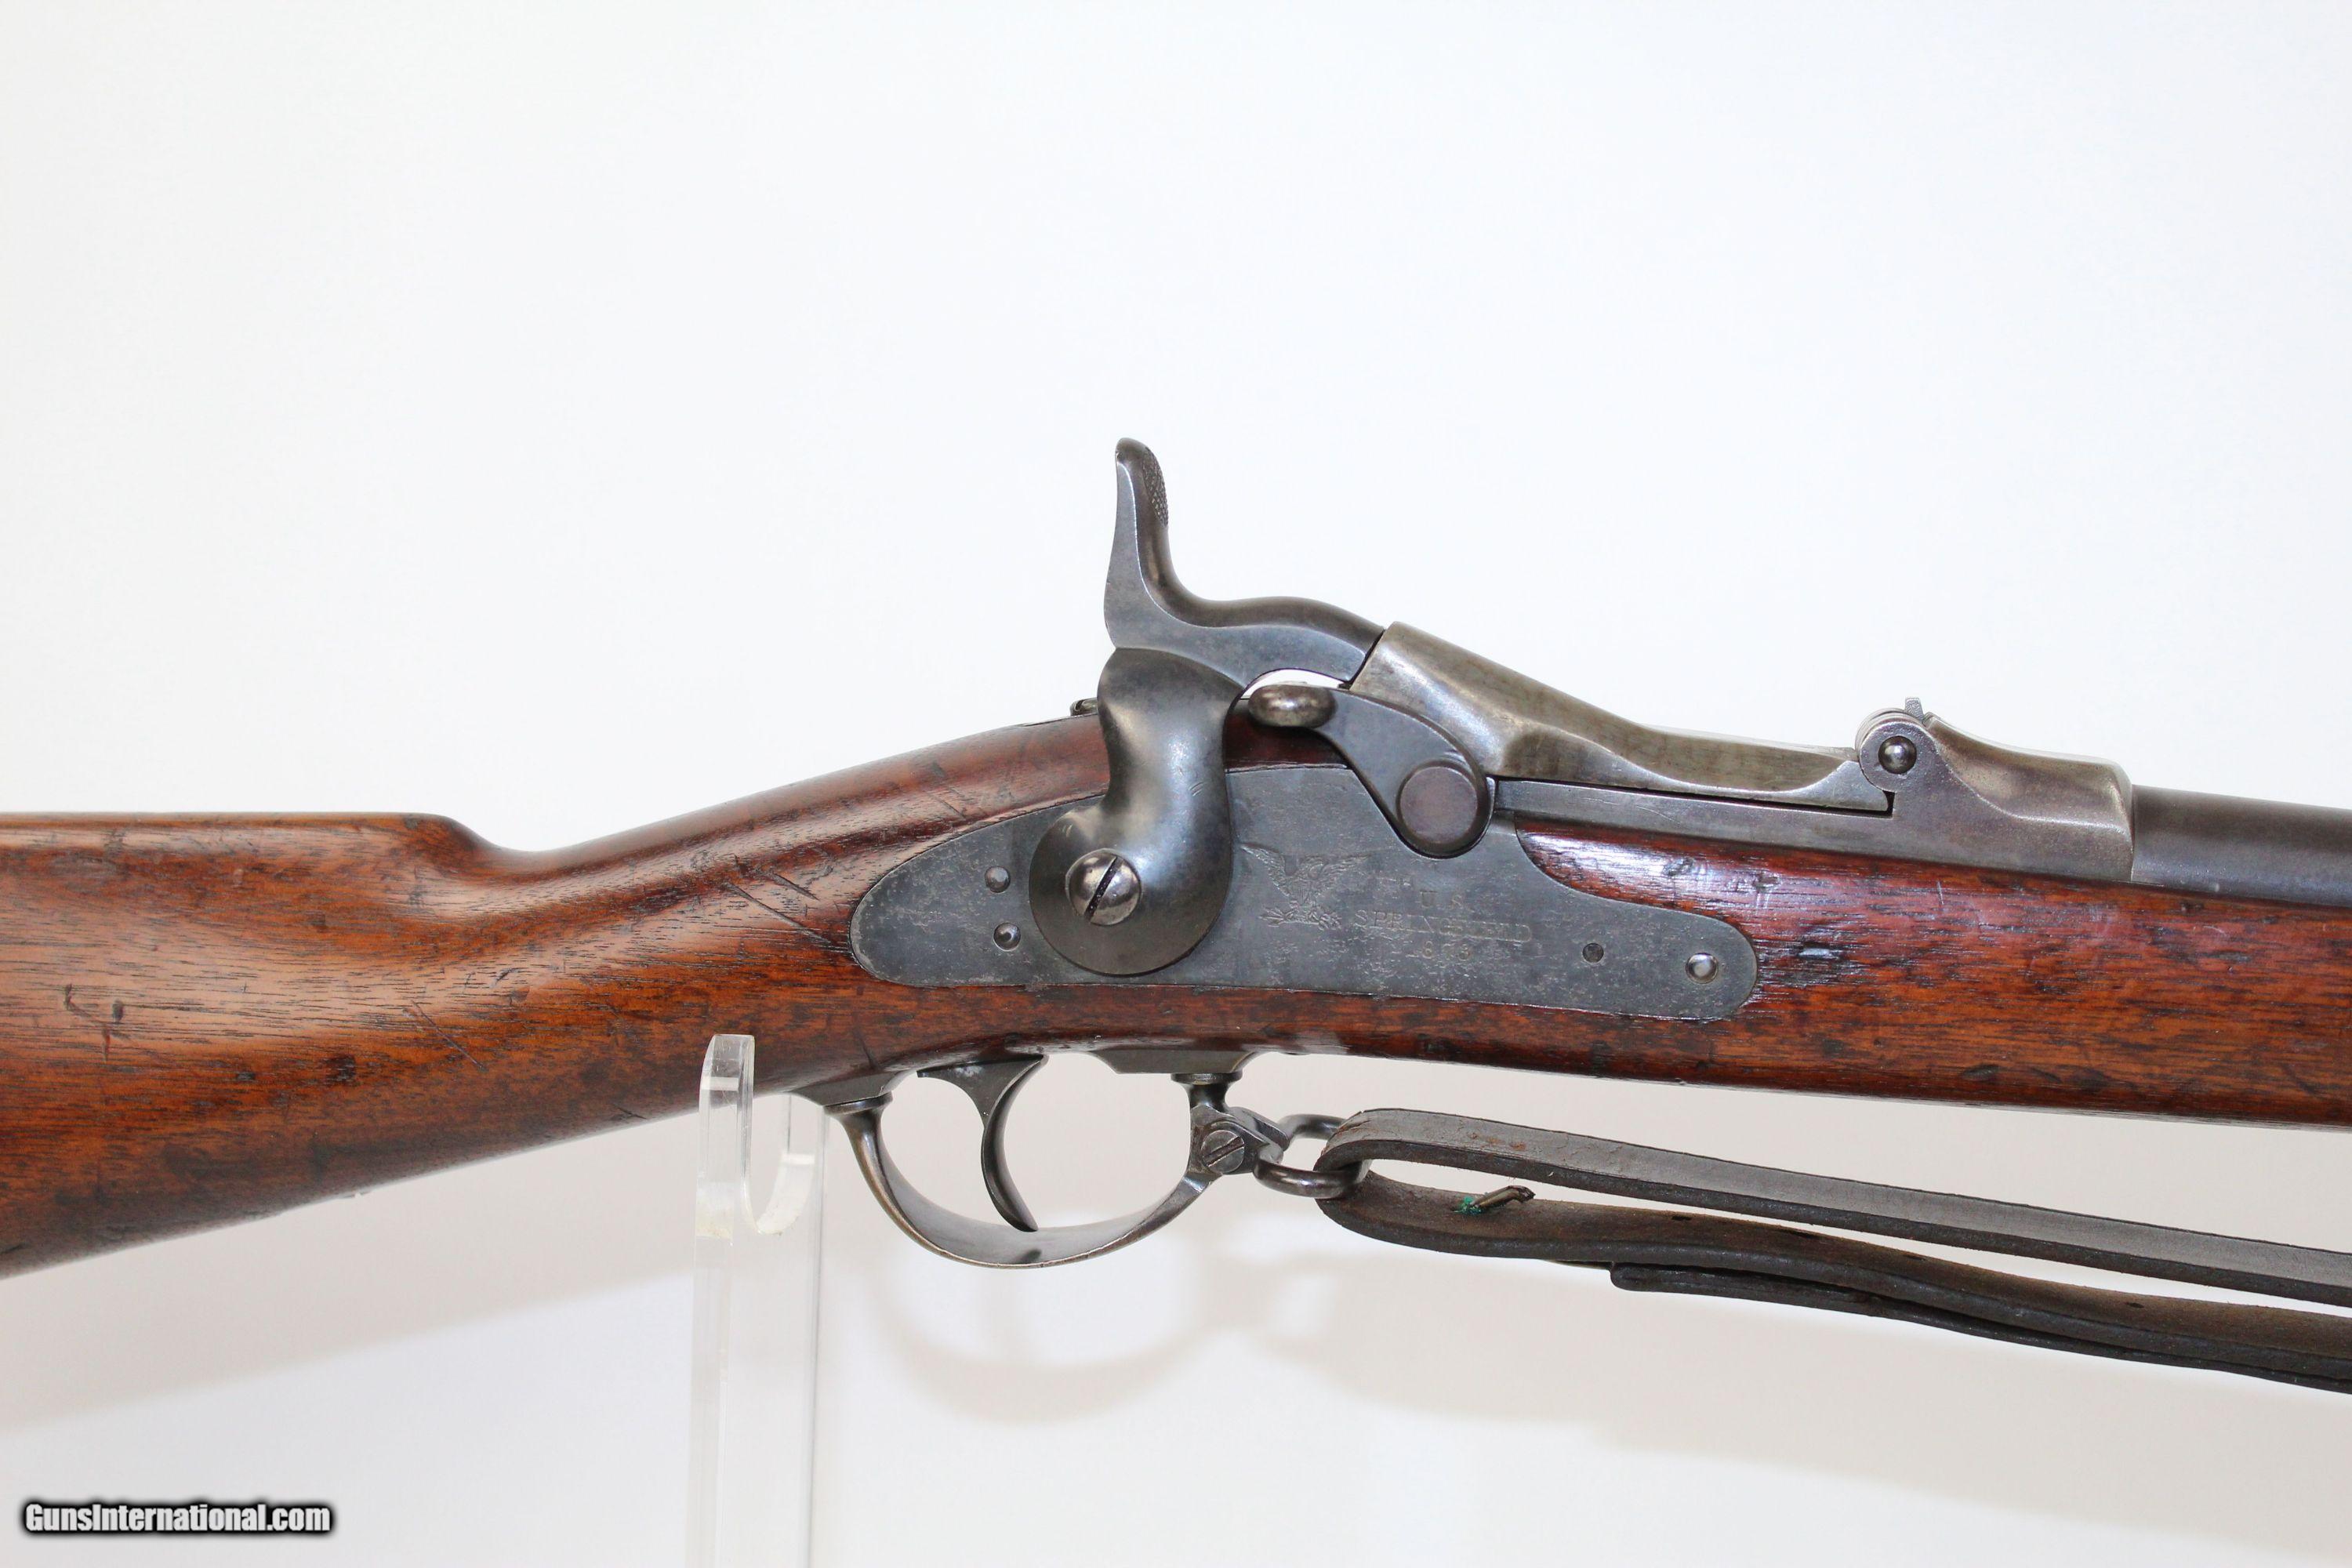 1873 springfield trapdoor rifle with scope